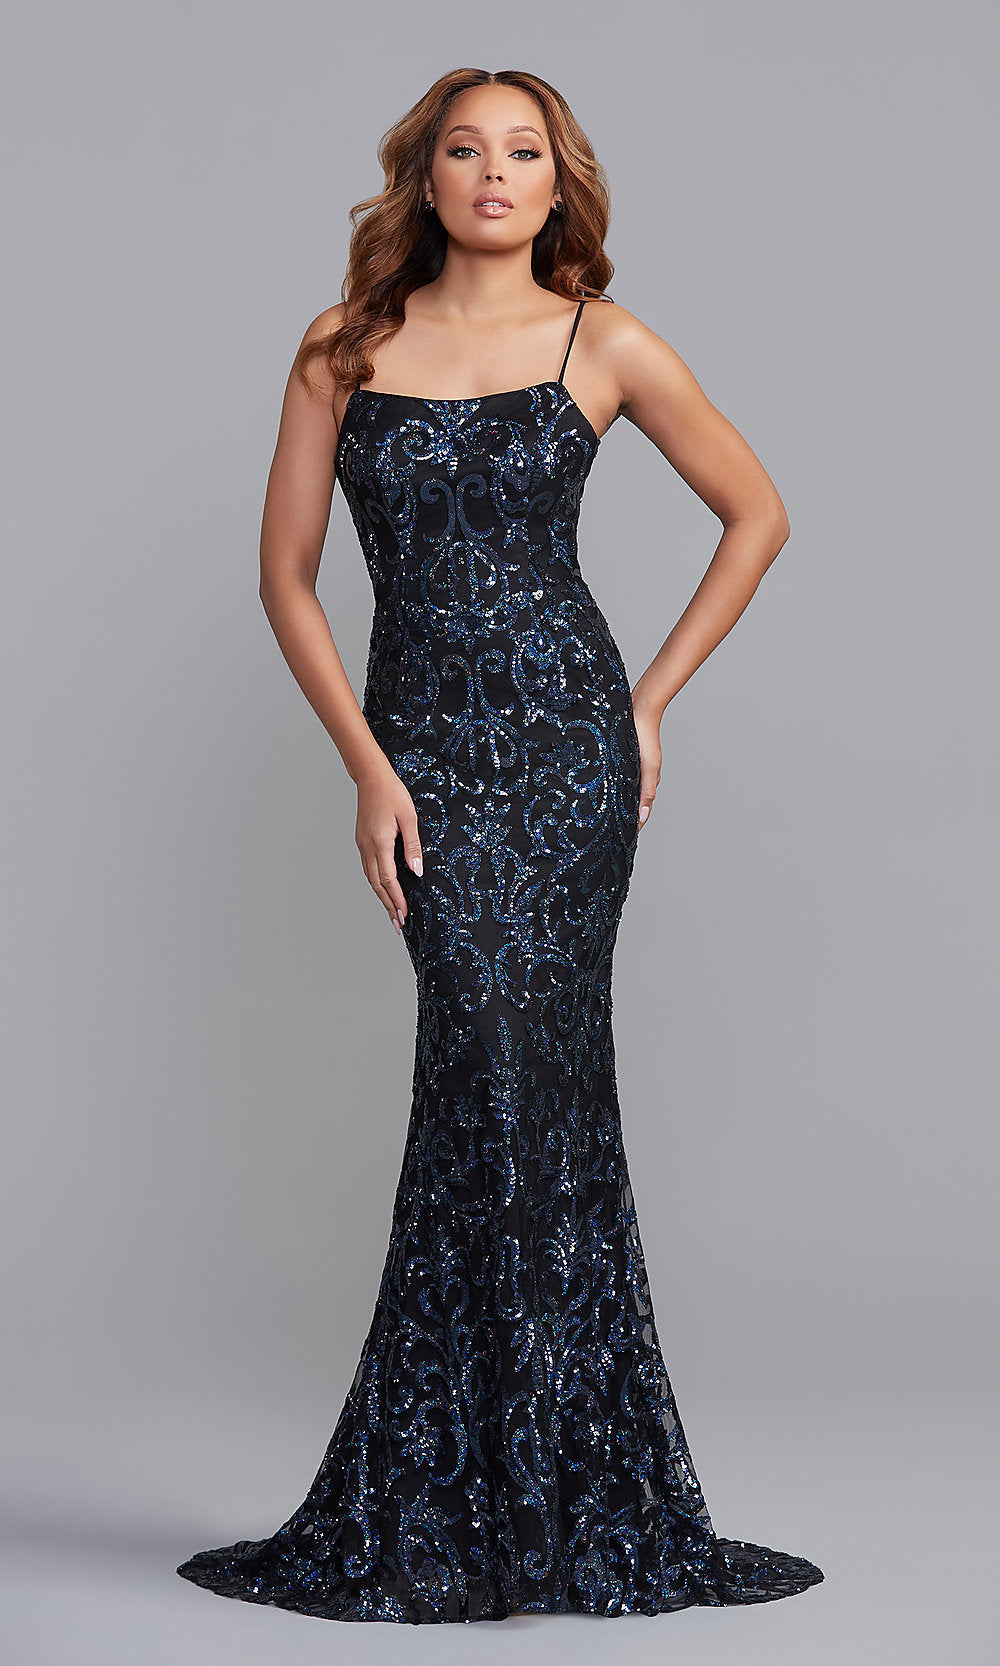 Navy Blue Sequin-Print Long Formal Dress with Corset Back